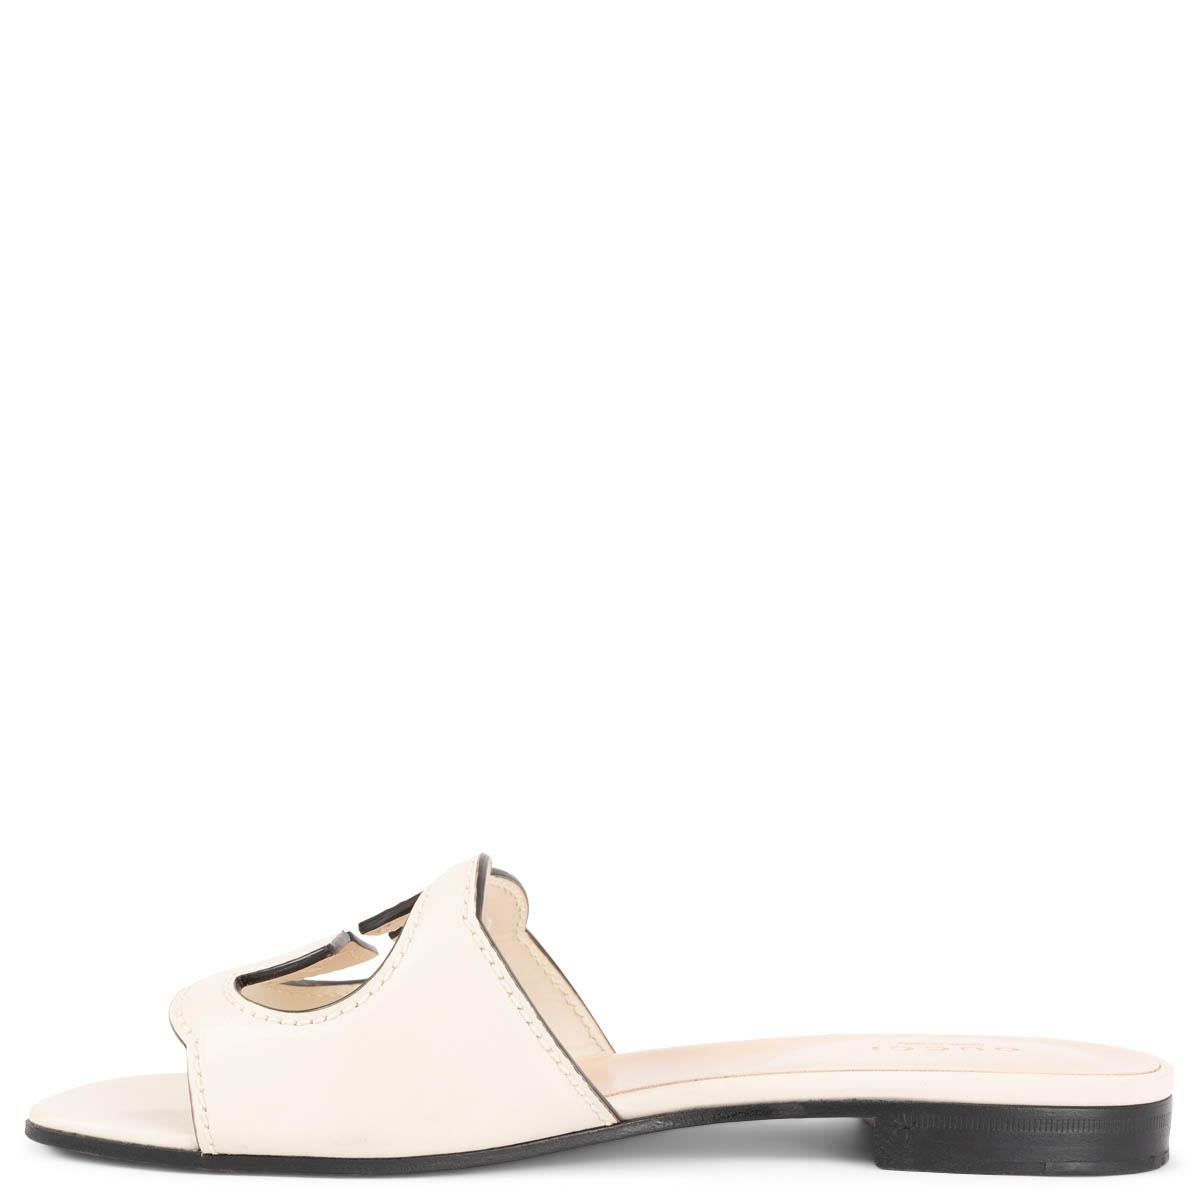 White GUCCI cream leather INTERLOCKING G CUT-OUT SLIDE Sandals Shoes 35 For Sale